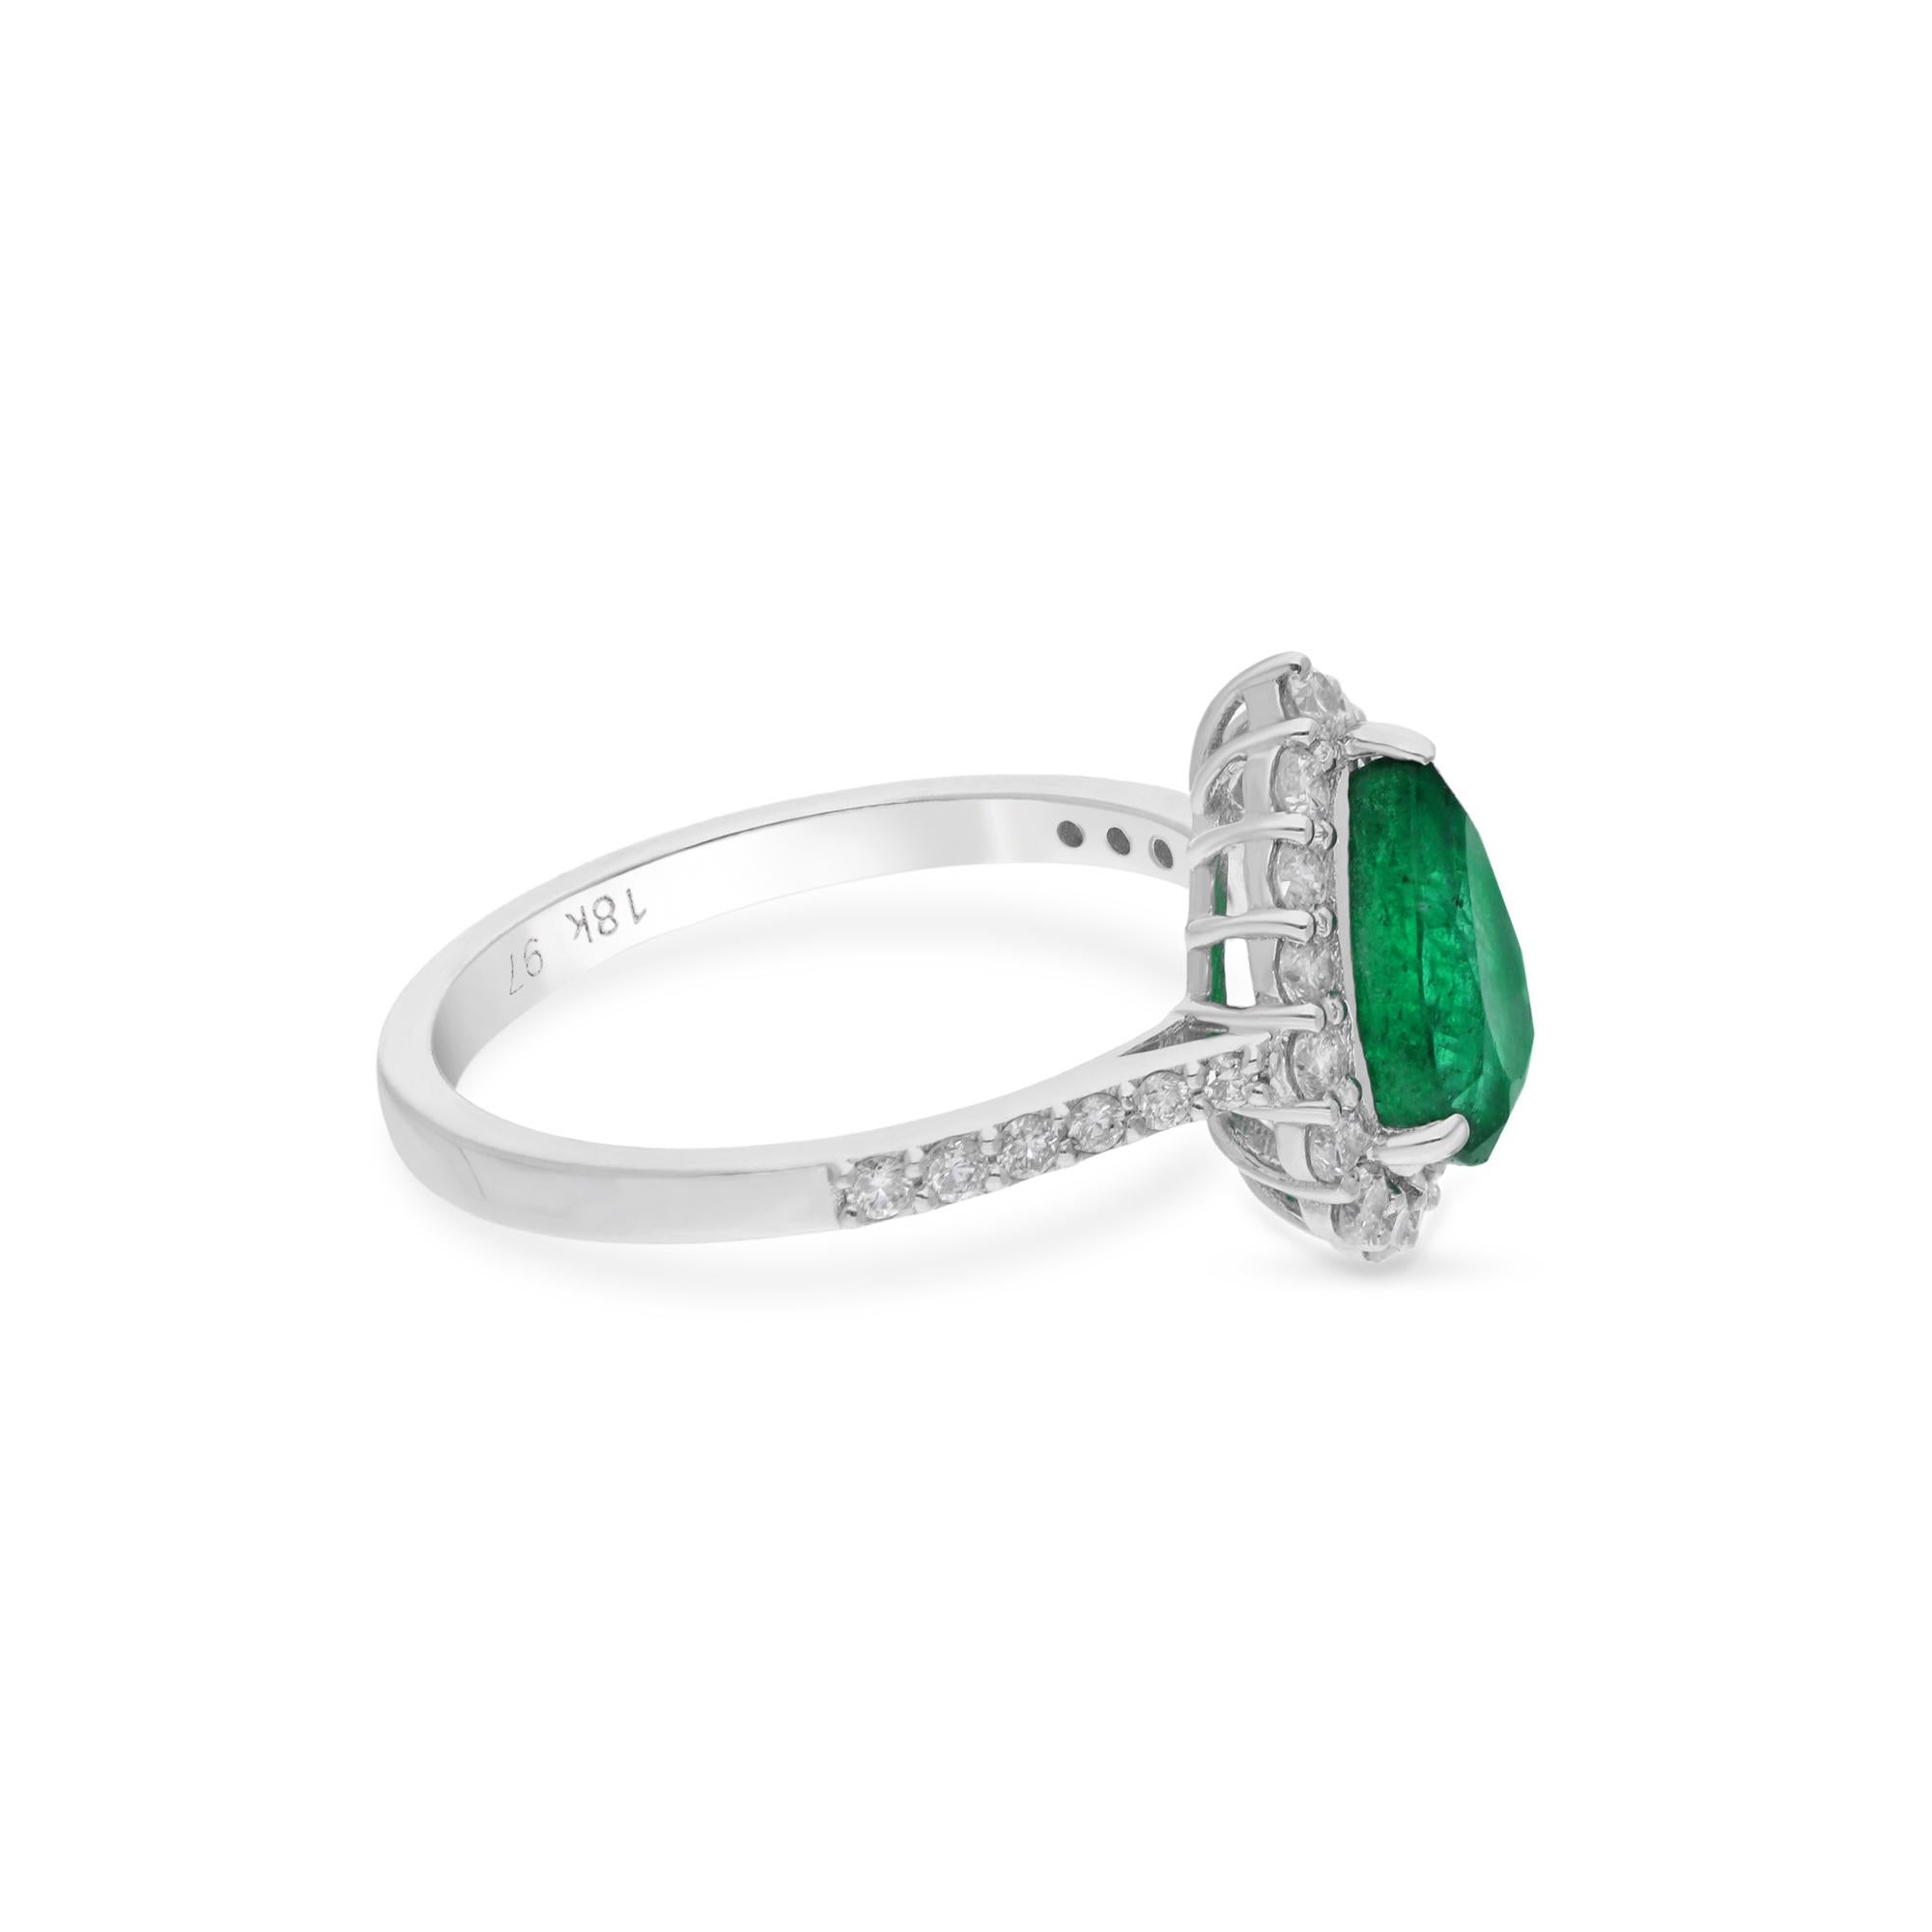 Step into the realm of timeless elegance with this exquisite Natural Pear Zambian Emerald Gemstone Ring, accented with sparkling diamonds and meticulously crafted in 18 karat white gold. At the heart of this captivating ring lies a luscious